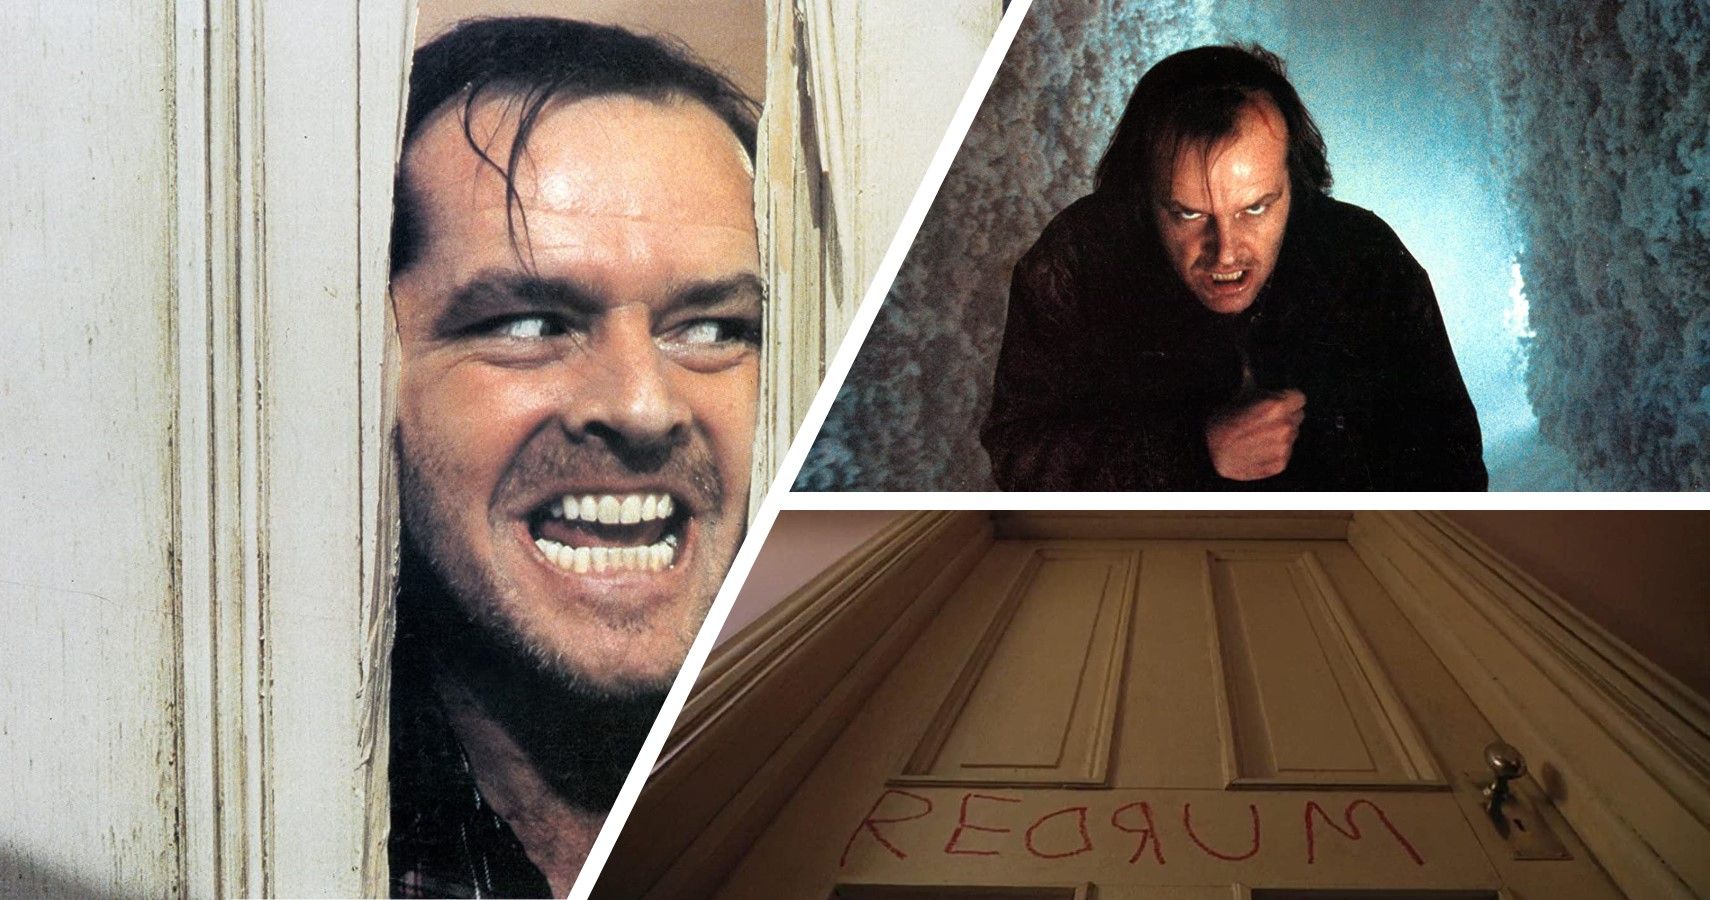 The Shining 10 Crucial Scenes From The Book That Didn’t Make It Into The Movie